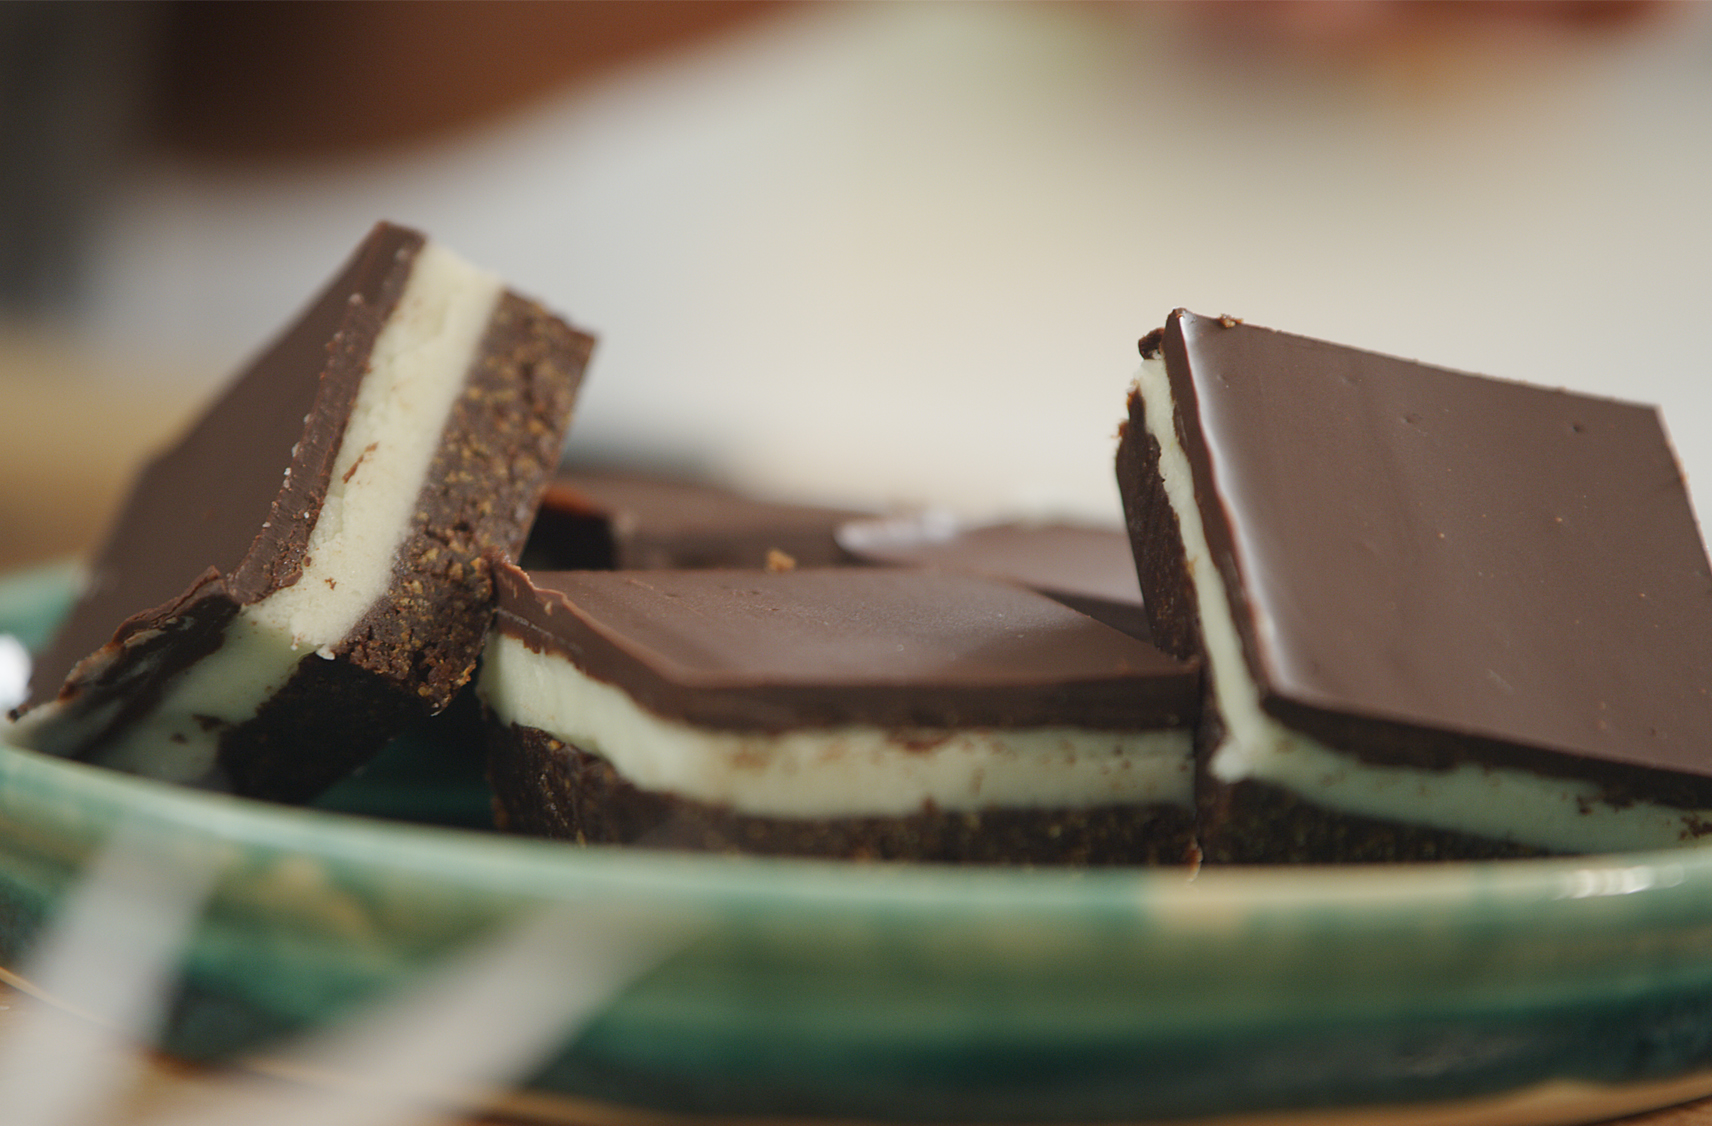 Delicious treats are made of three layers: Graham crackers, vanilla and chocolate.